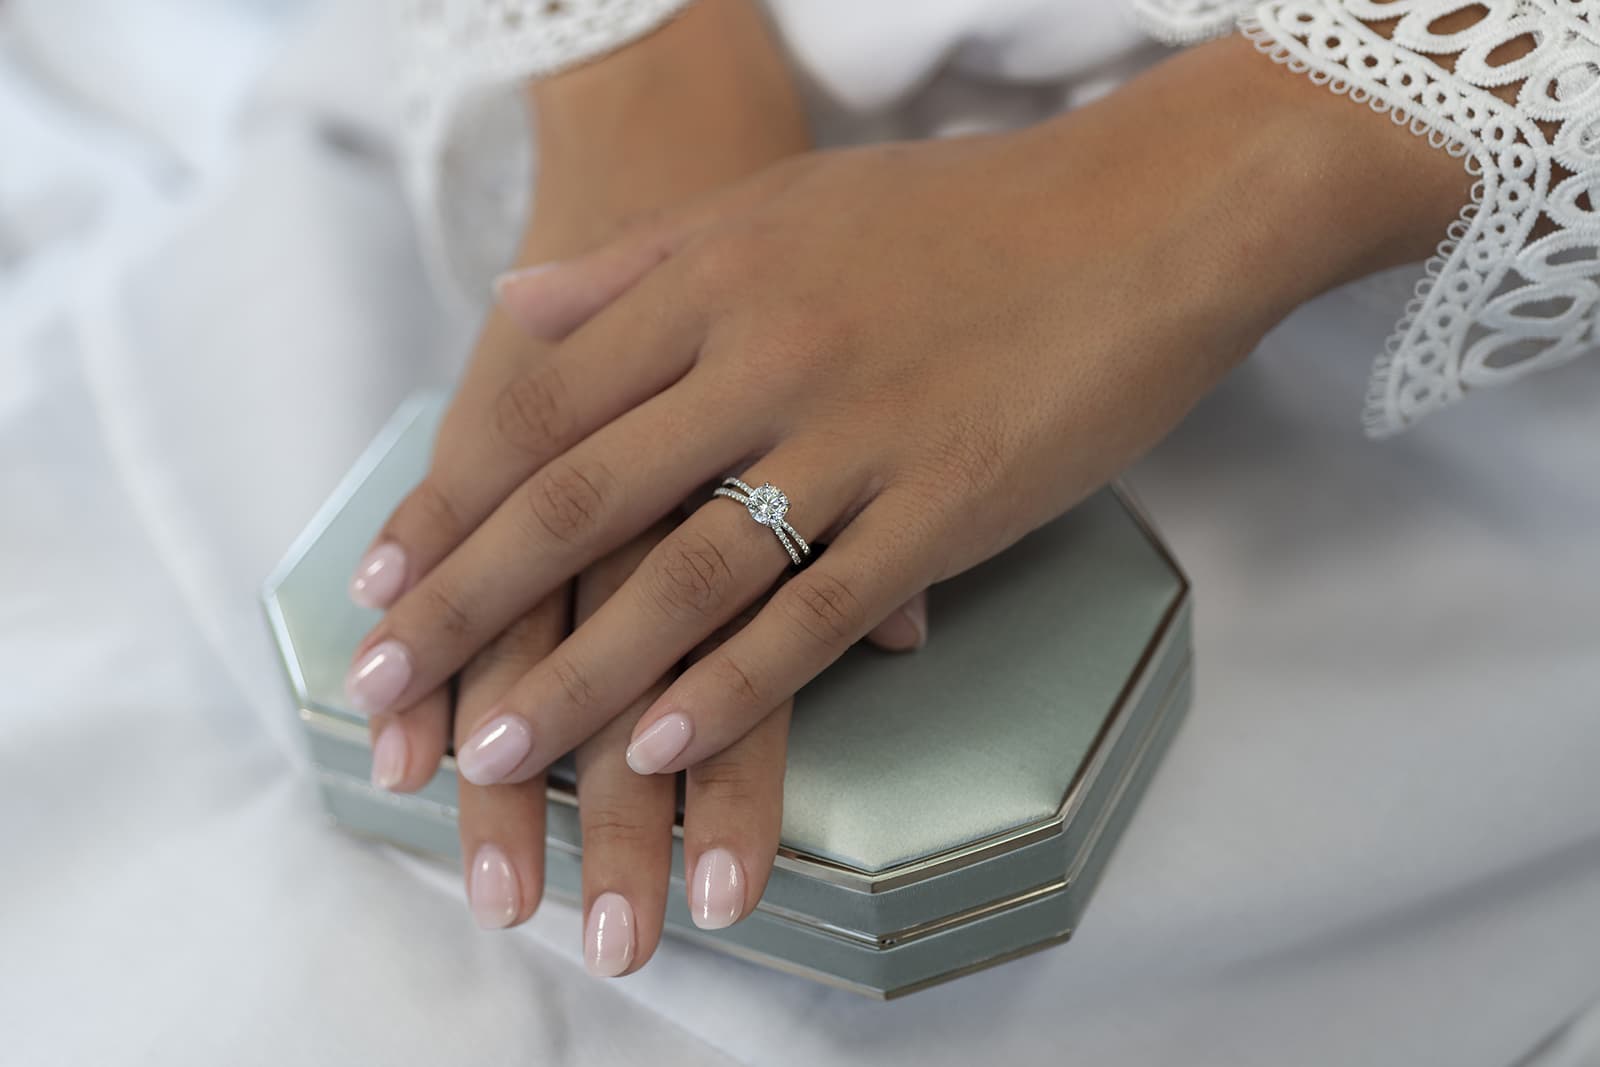 All the rings in the Forevermark x Micaela Erlanger bridal are crafted in platinum, which highlights the brilliance of the Forevermark diamonds at their heart